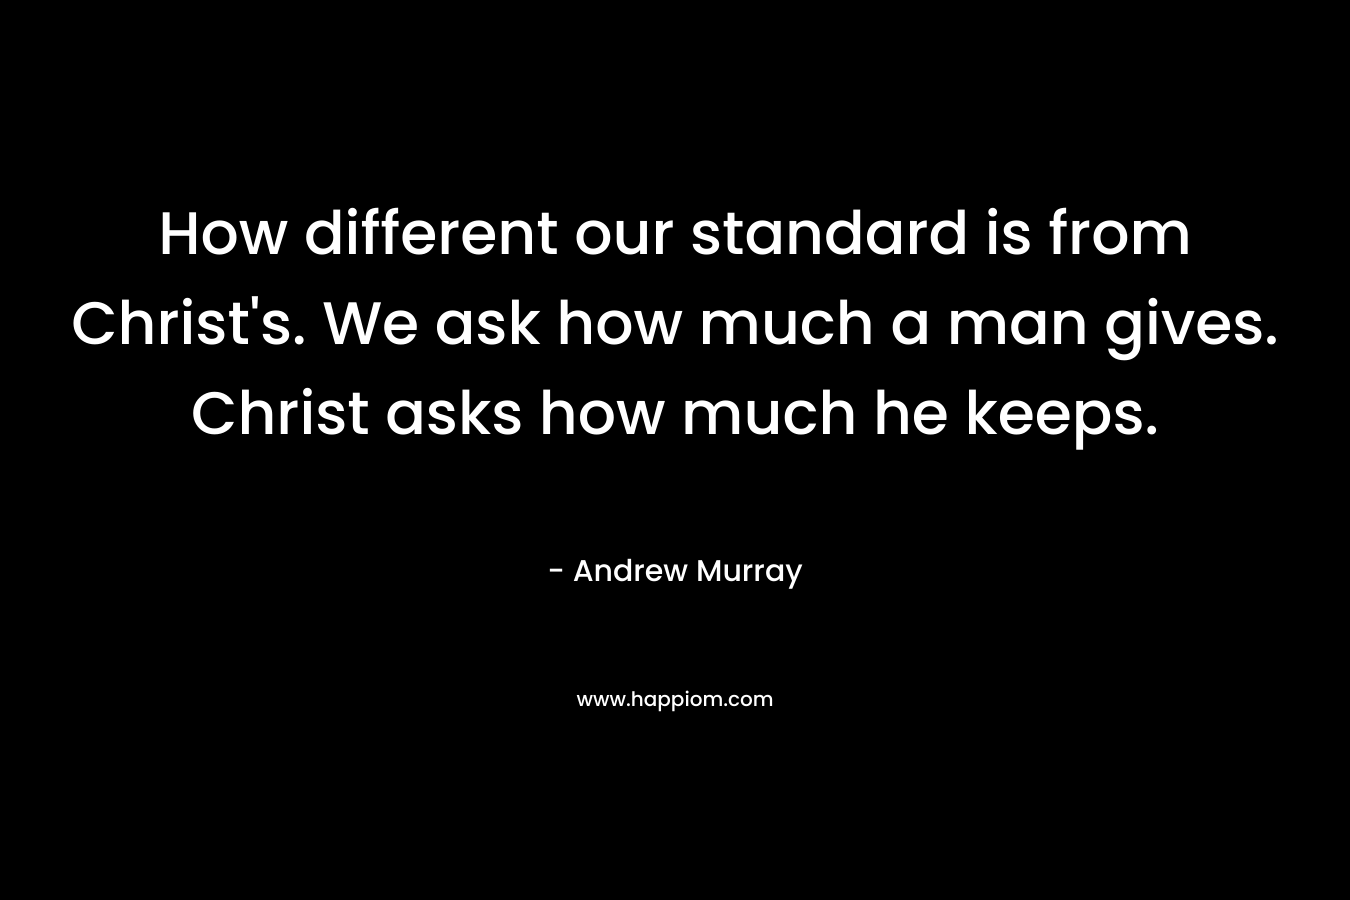 How different our standard is from Christ's. We ask how much a man gives. Christ asks how much he keeps.